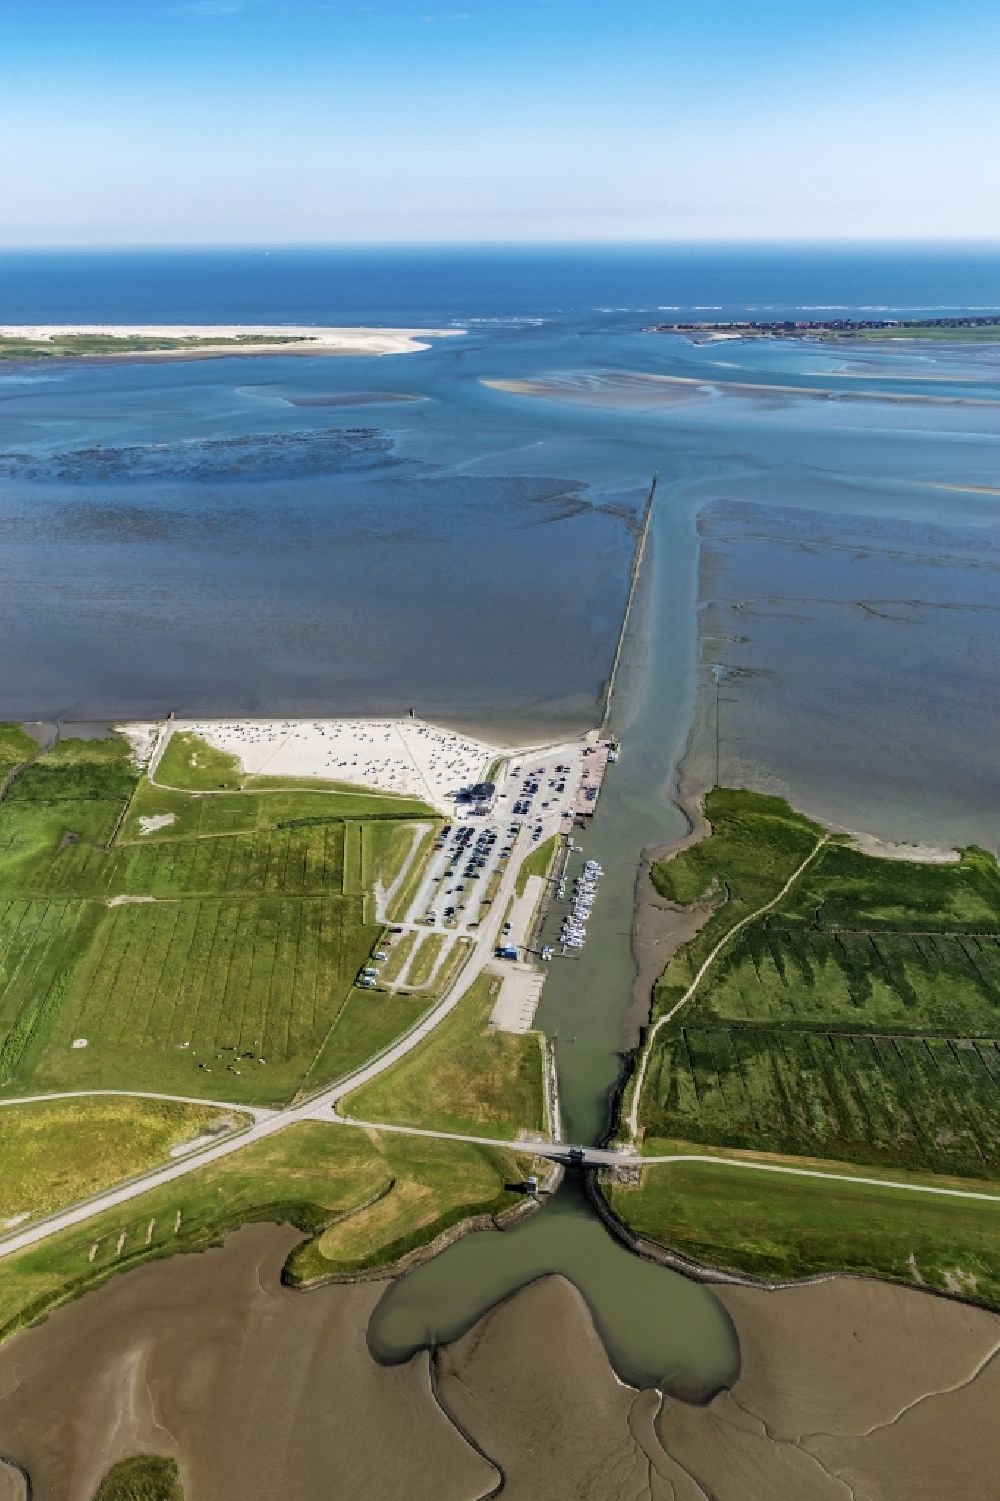 Dornum from above - East Frisian coast near Nessmersiehl in the state of Lower Saxony. The community Dorum is located in Ostfriesland on the North Sea coast. Along the coastline extends the Lower Saxony Wadden Sea National Park, which has been a UNESCO World Heritage Site since 2009. The landscape is characterized by the Wadden Sea, agriculture and fields